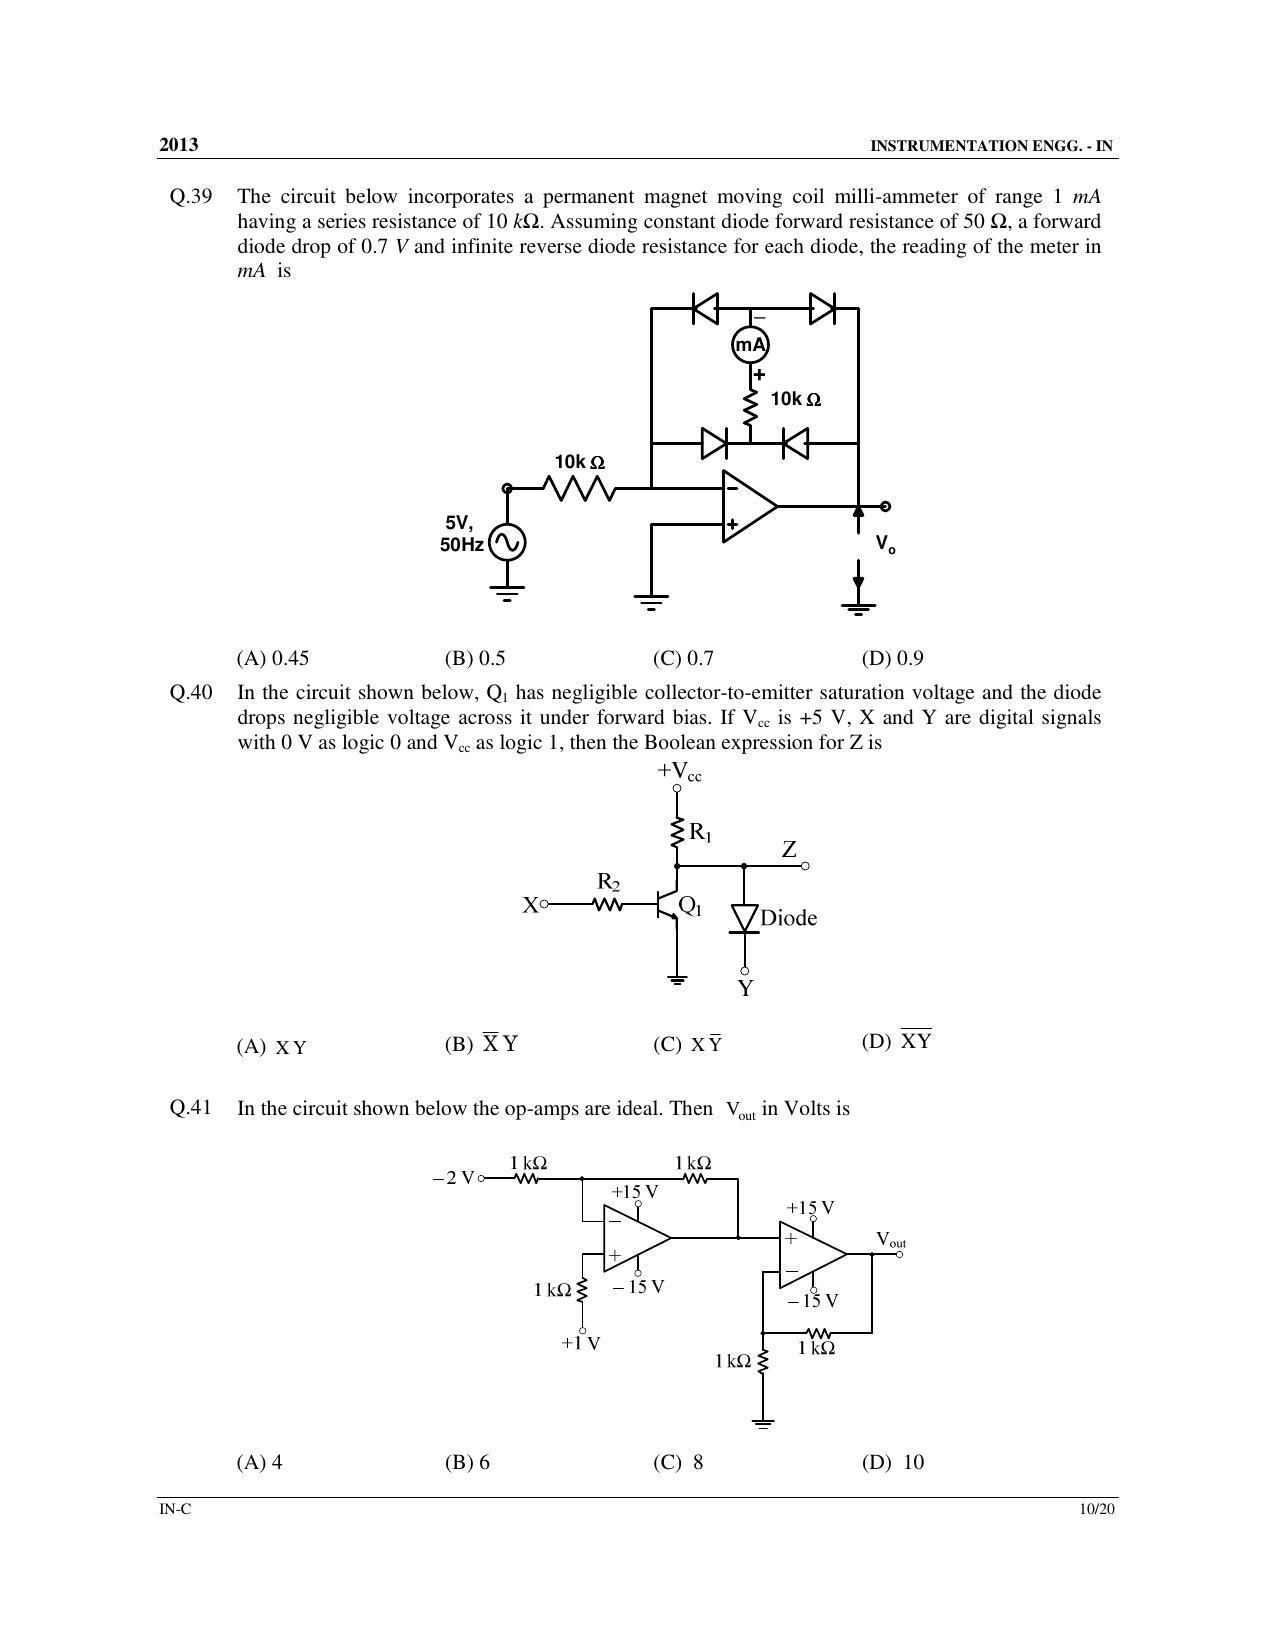 GATE 2013 Instrumentation Engineering (IN) Question Paper with Answer Key - Page 45